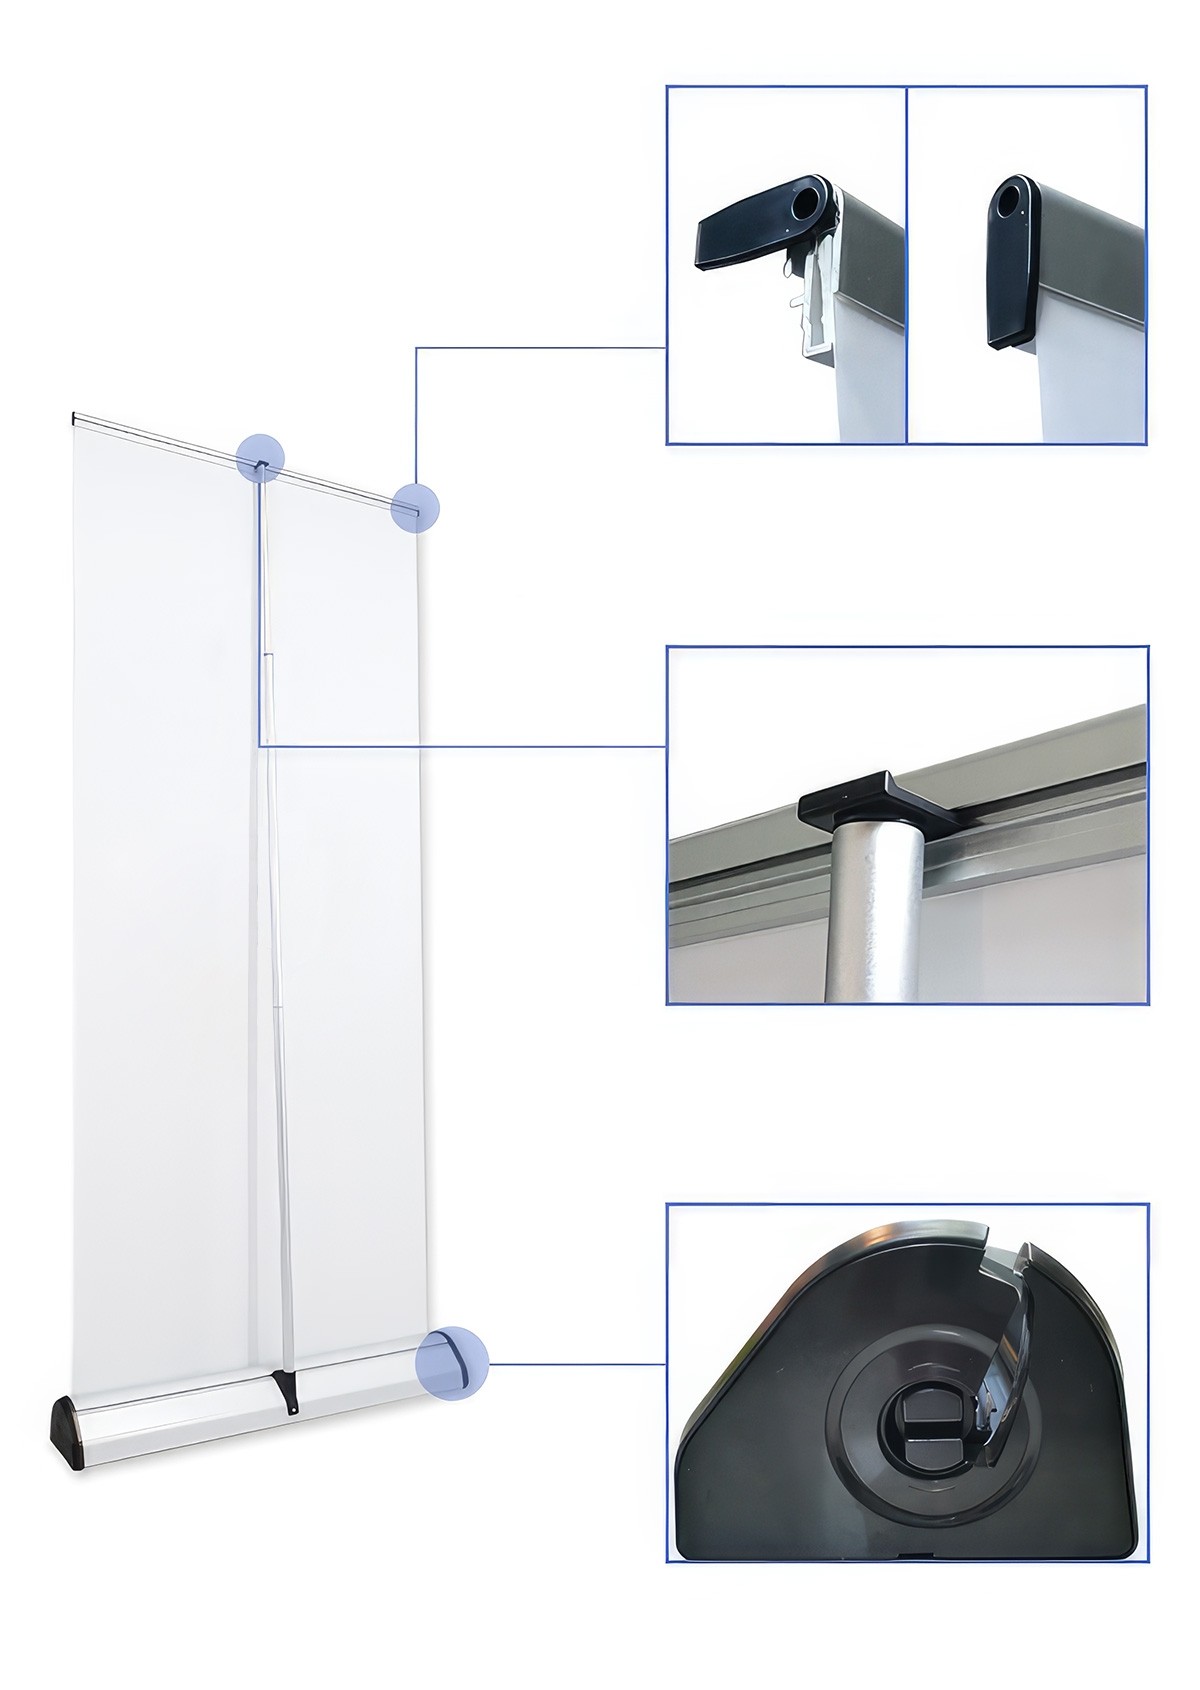 Lock & Roll 48 Retractable Banner Stand